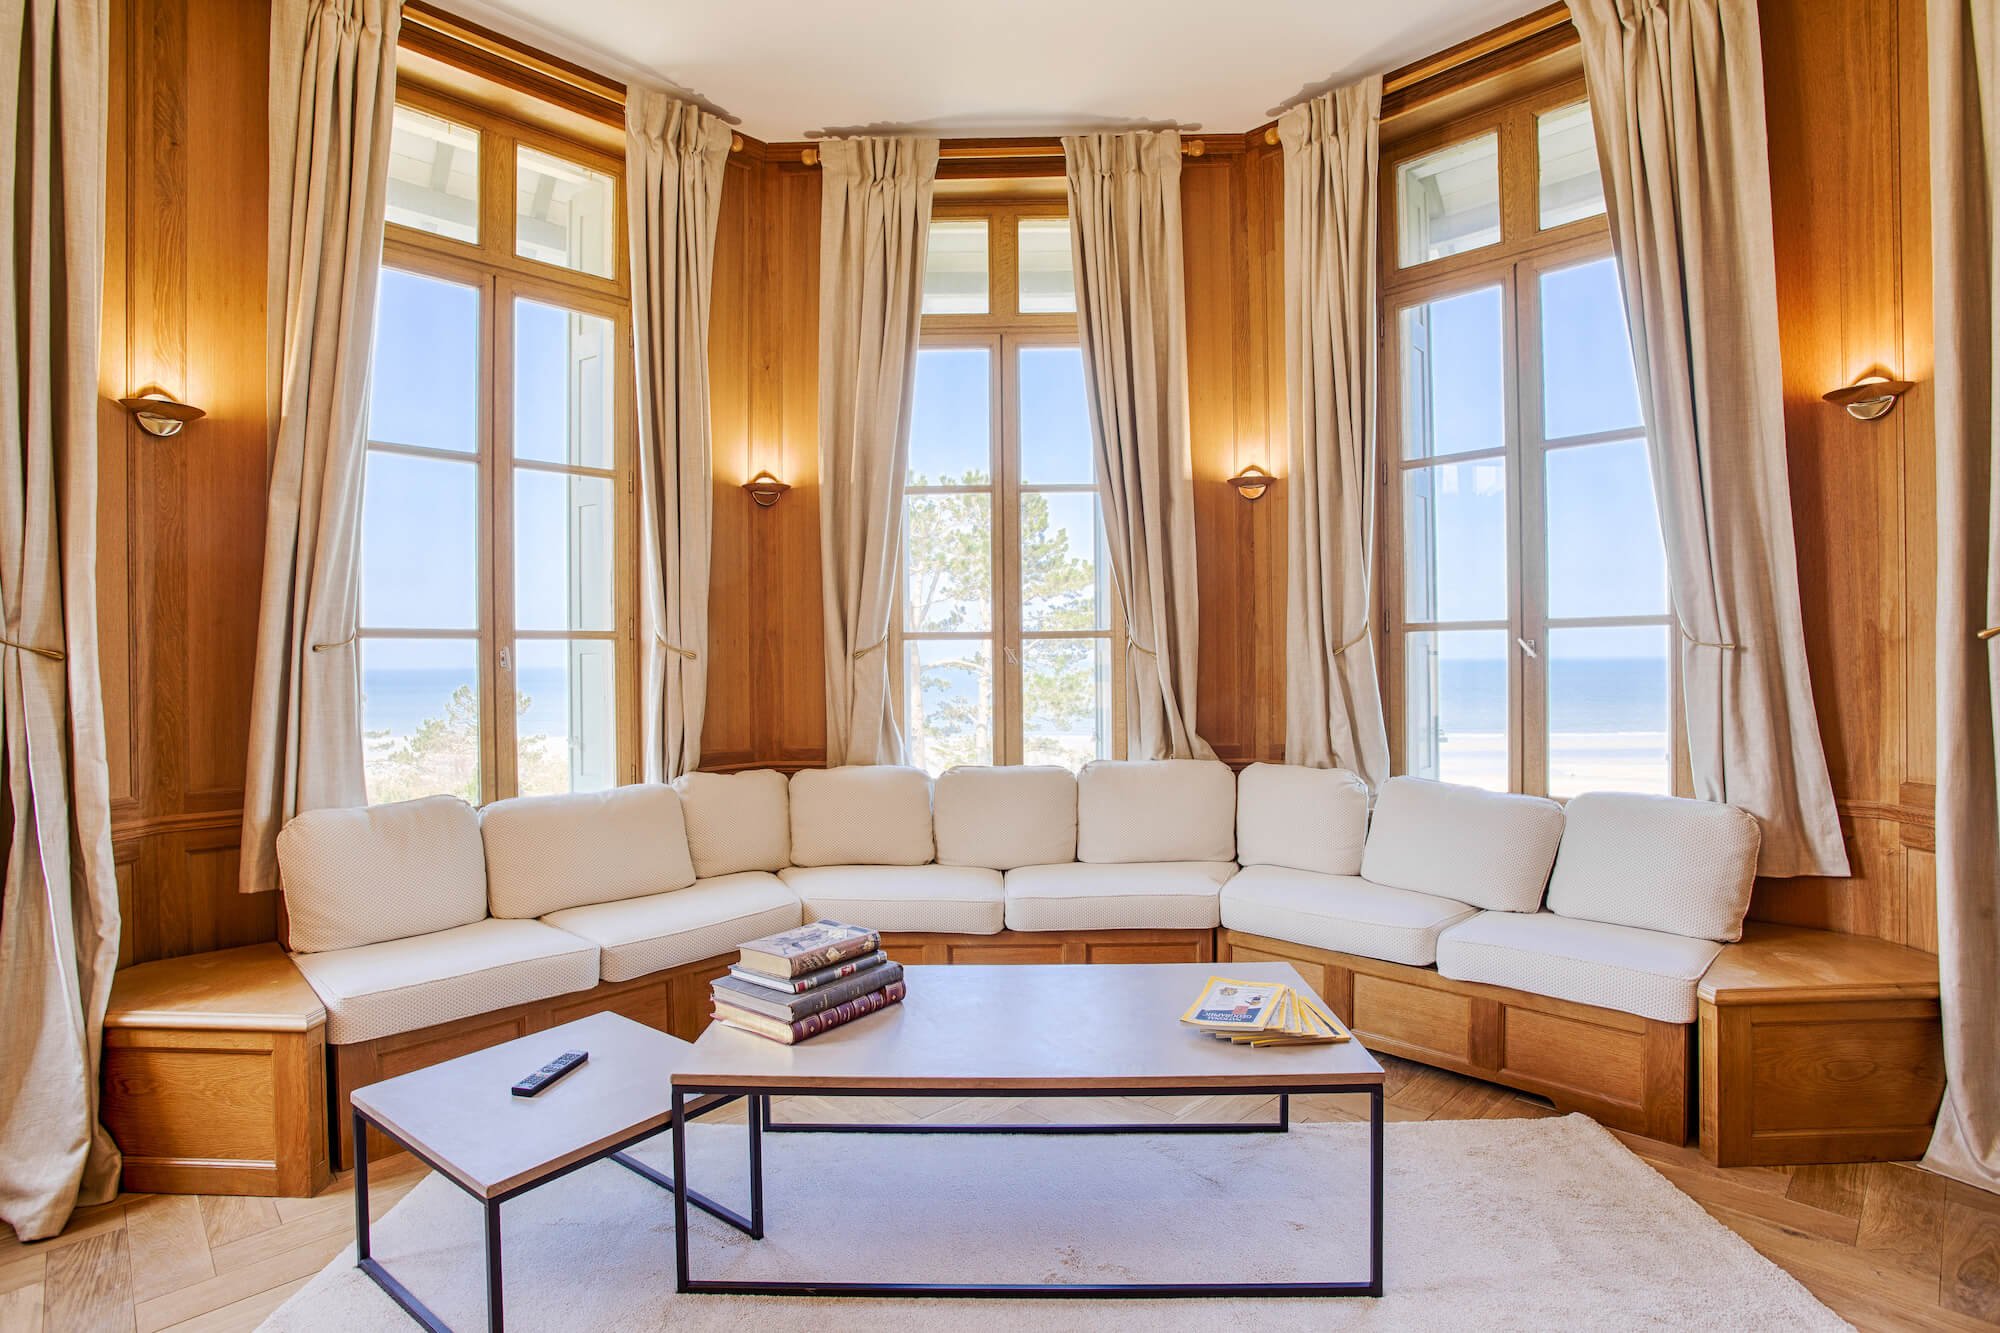 An exceptional house by the sea for a seminar in Deauville near Paris